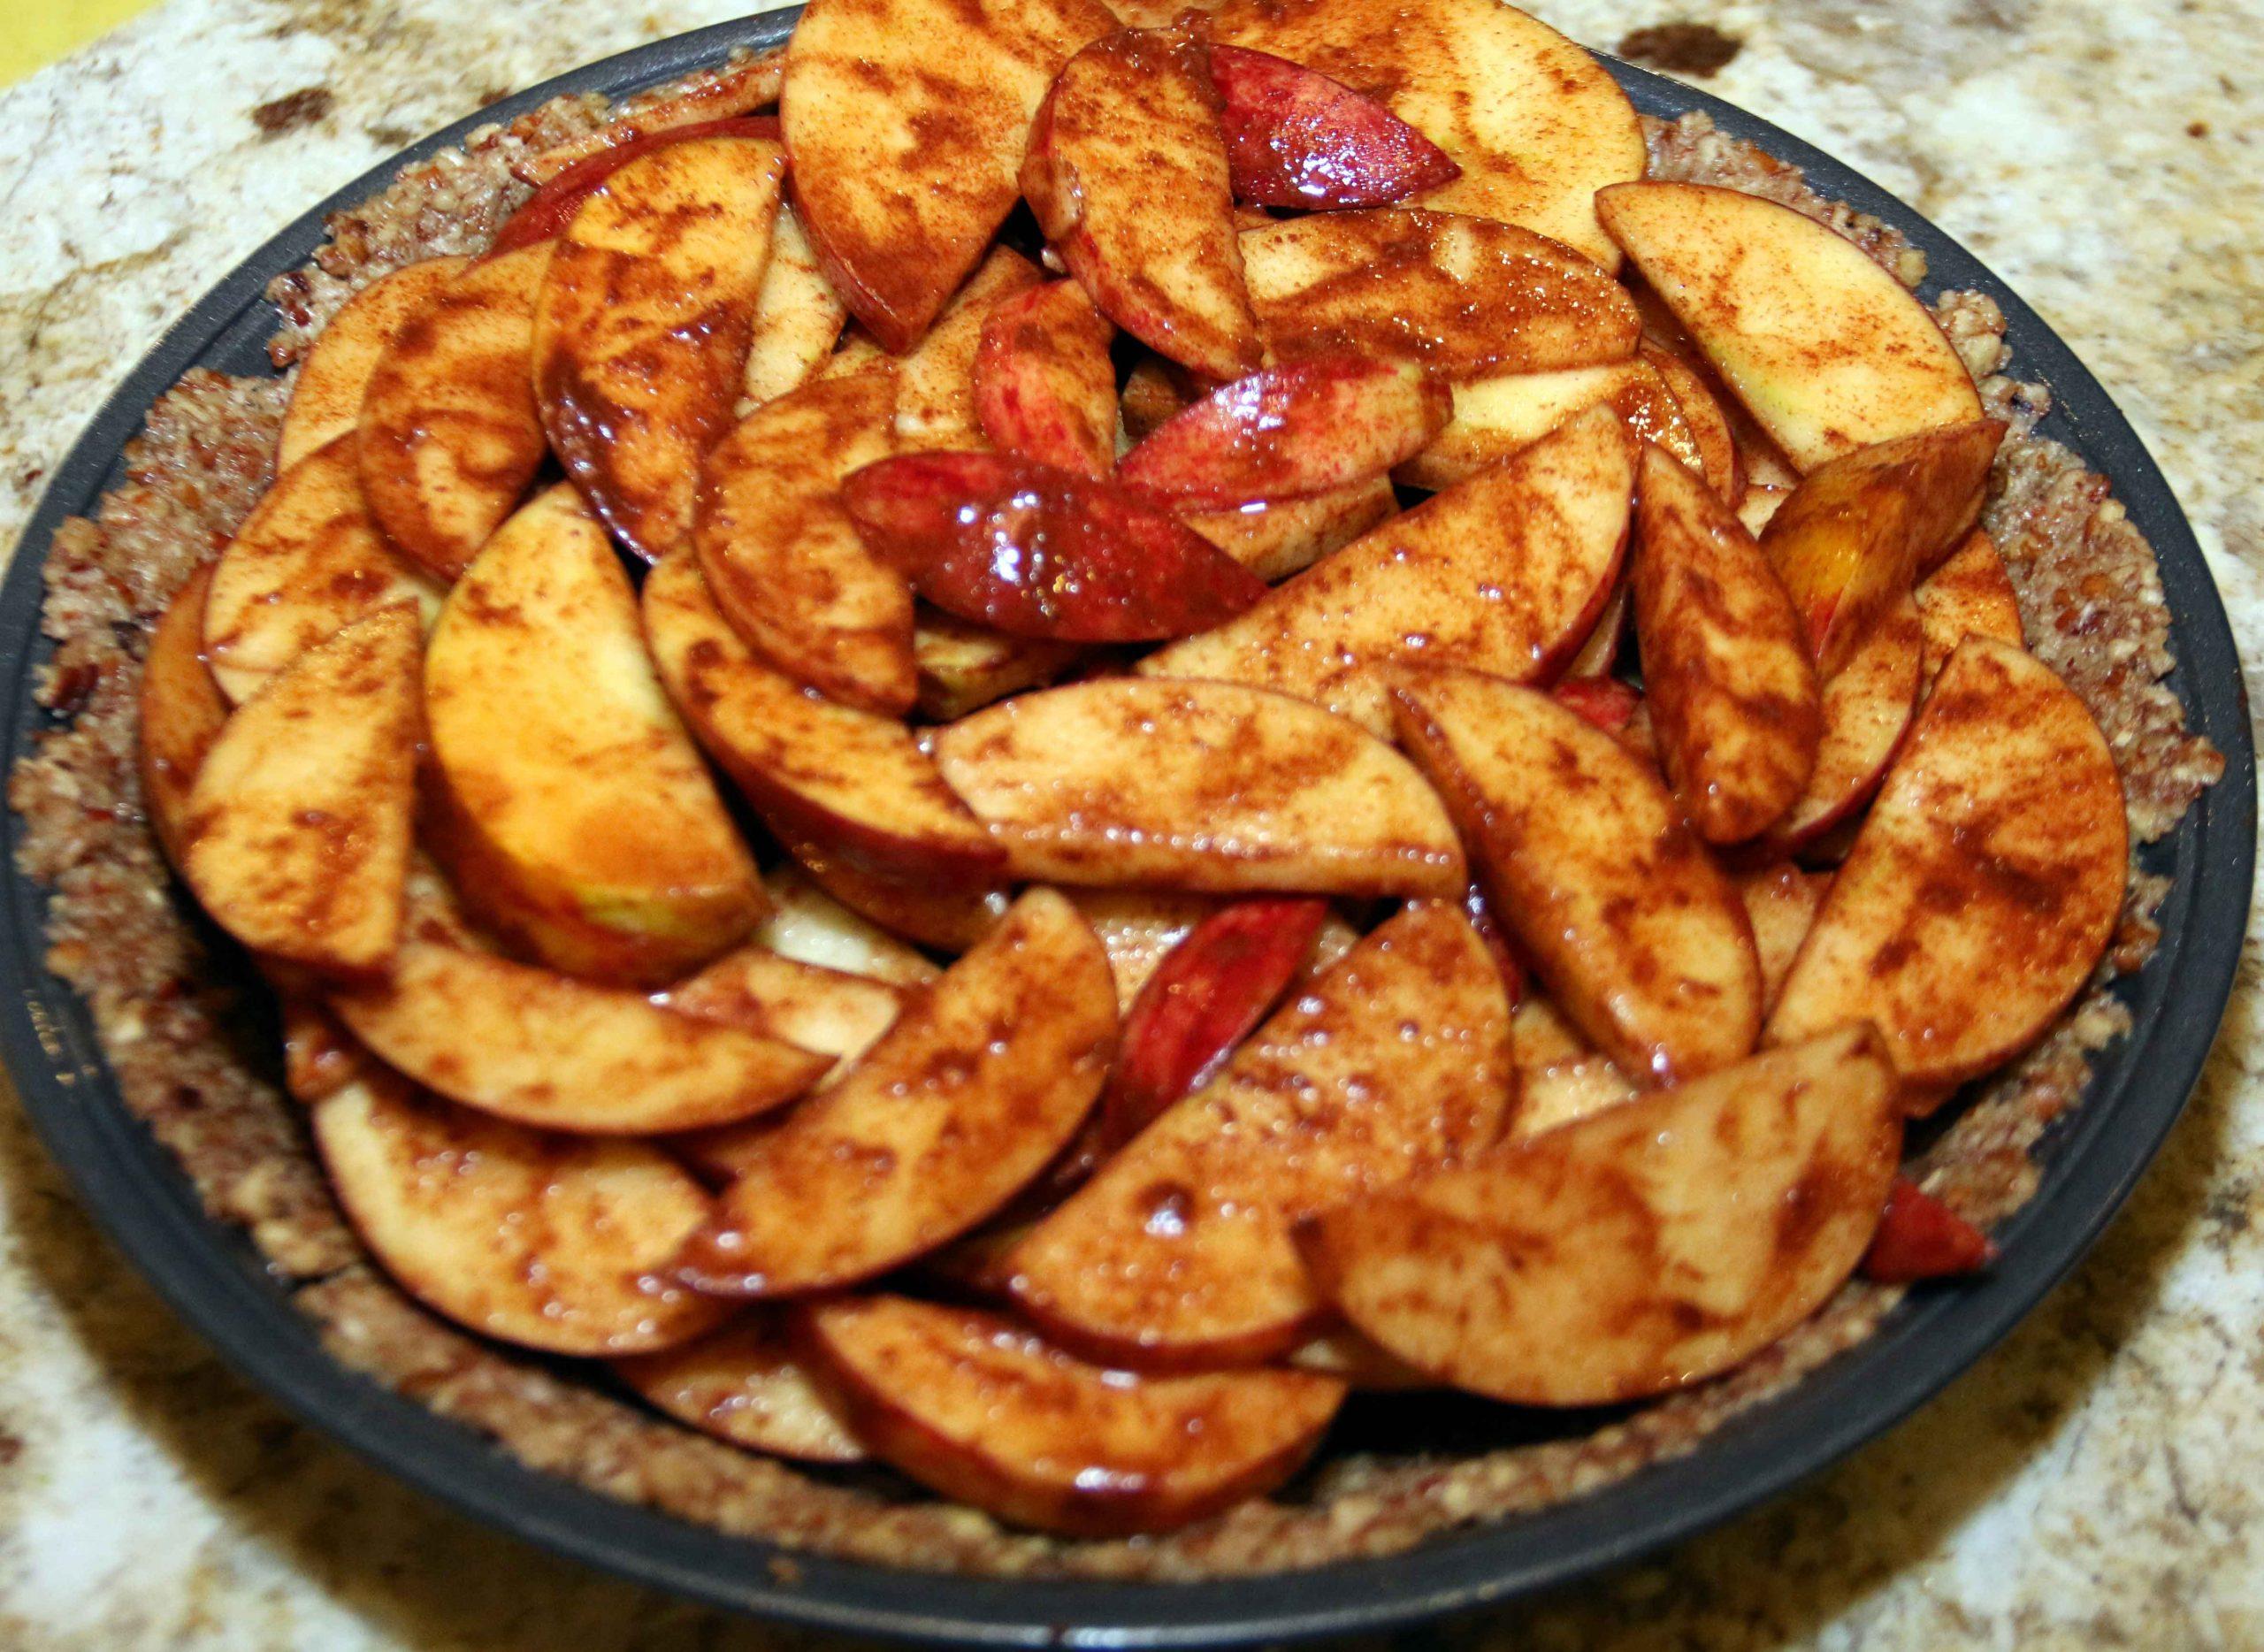 If you're looking for a healthier alternative to the traditional apple pie without all the added sugar, this is your new recipe. A yummy, healthy apple pie.